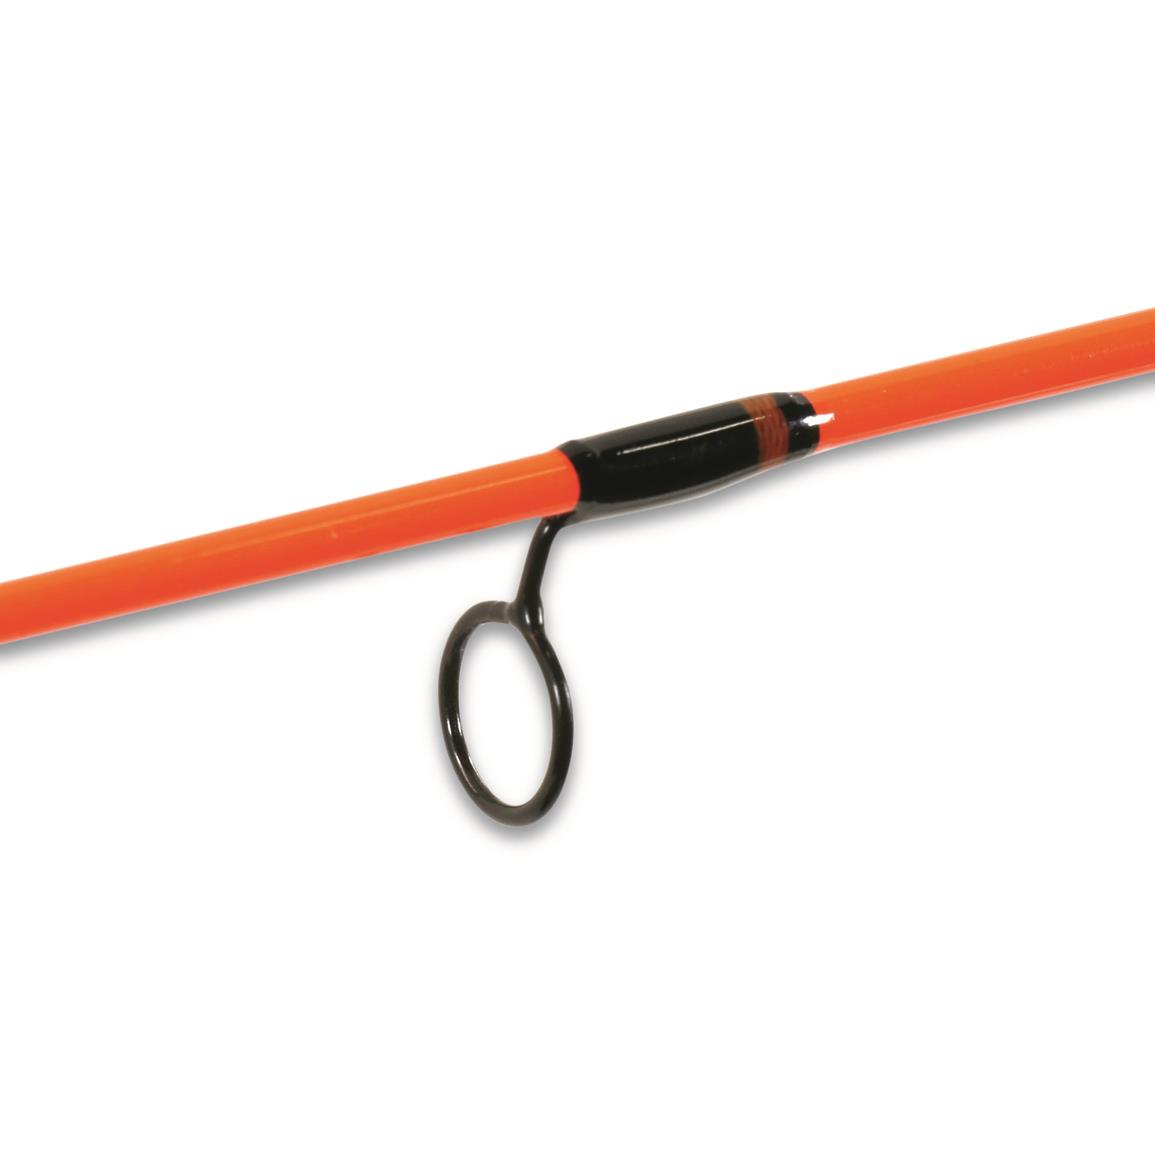 13 Fishing Wicked Ice Hornet Ice Fishing Combo, 26 Length, Medium Light  Power - 723683, Ice Fishing Combos at Sportsman's Guide